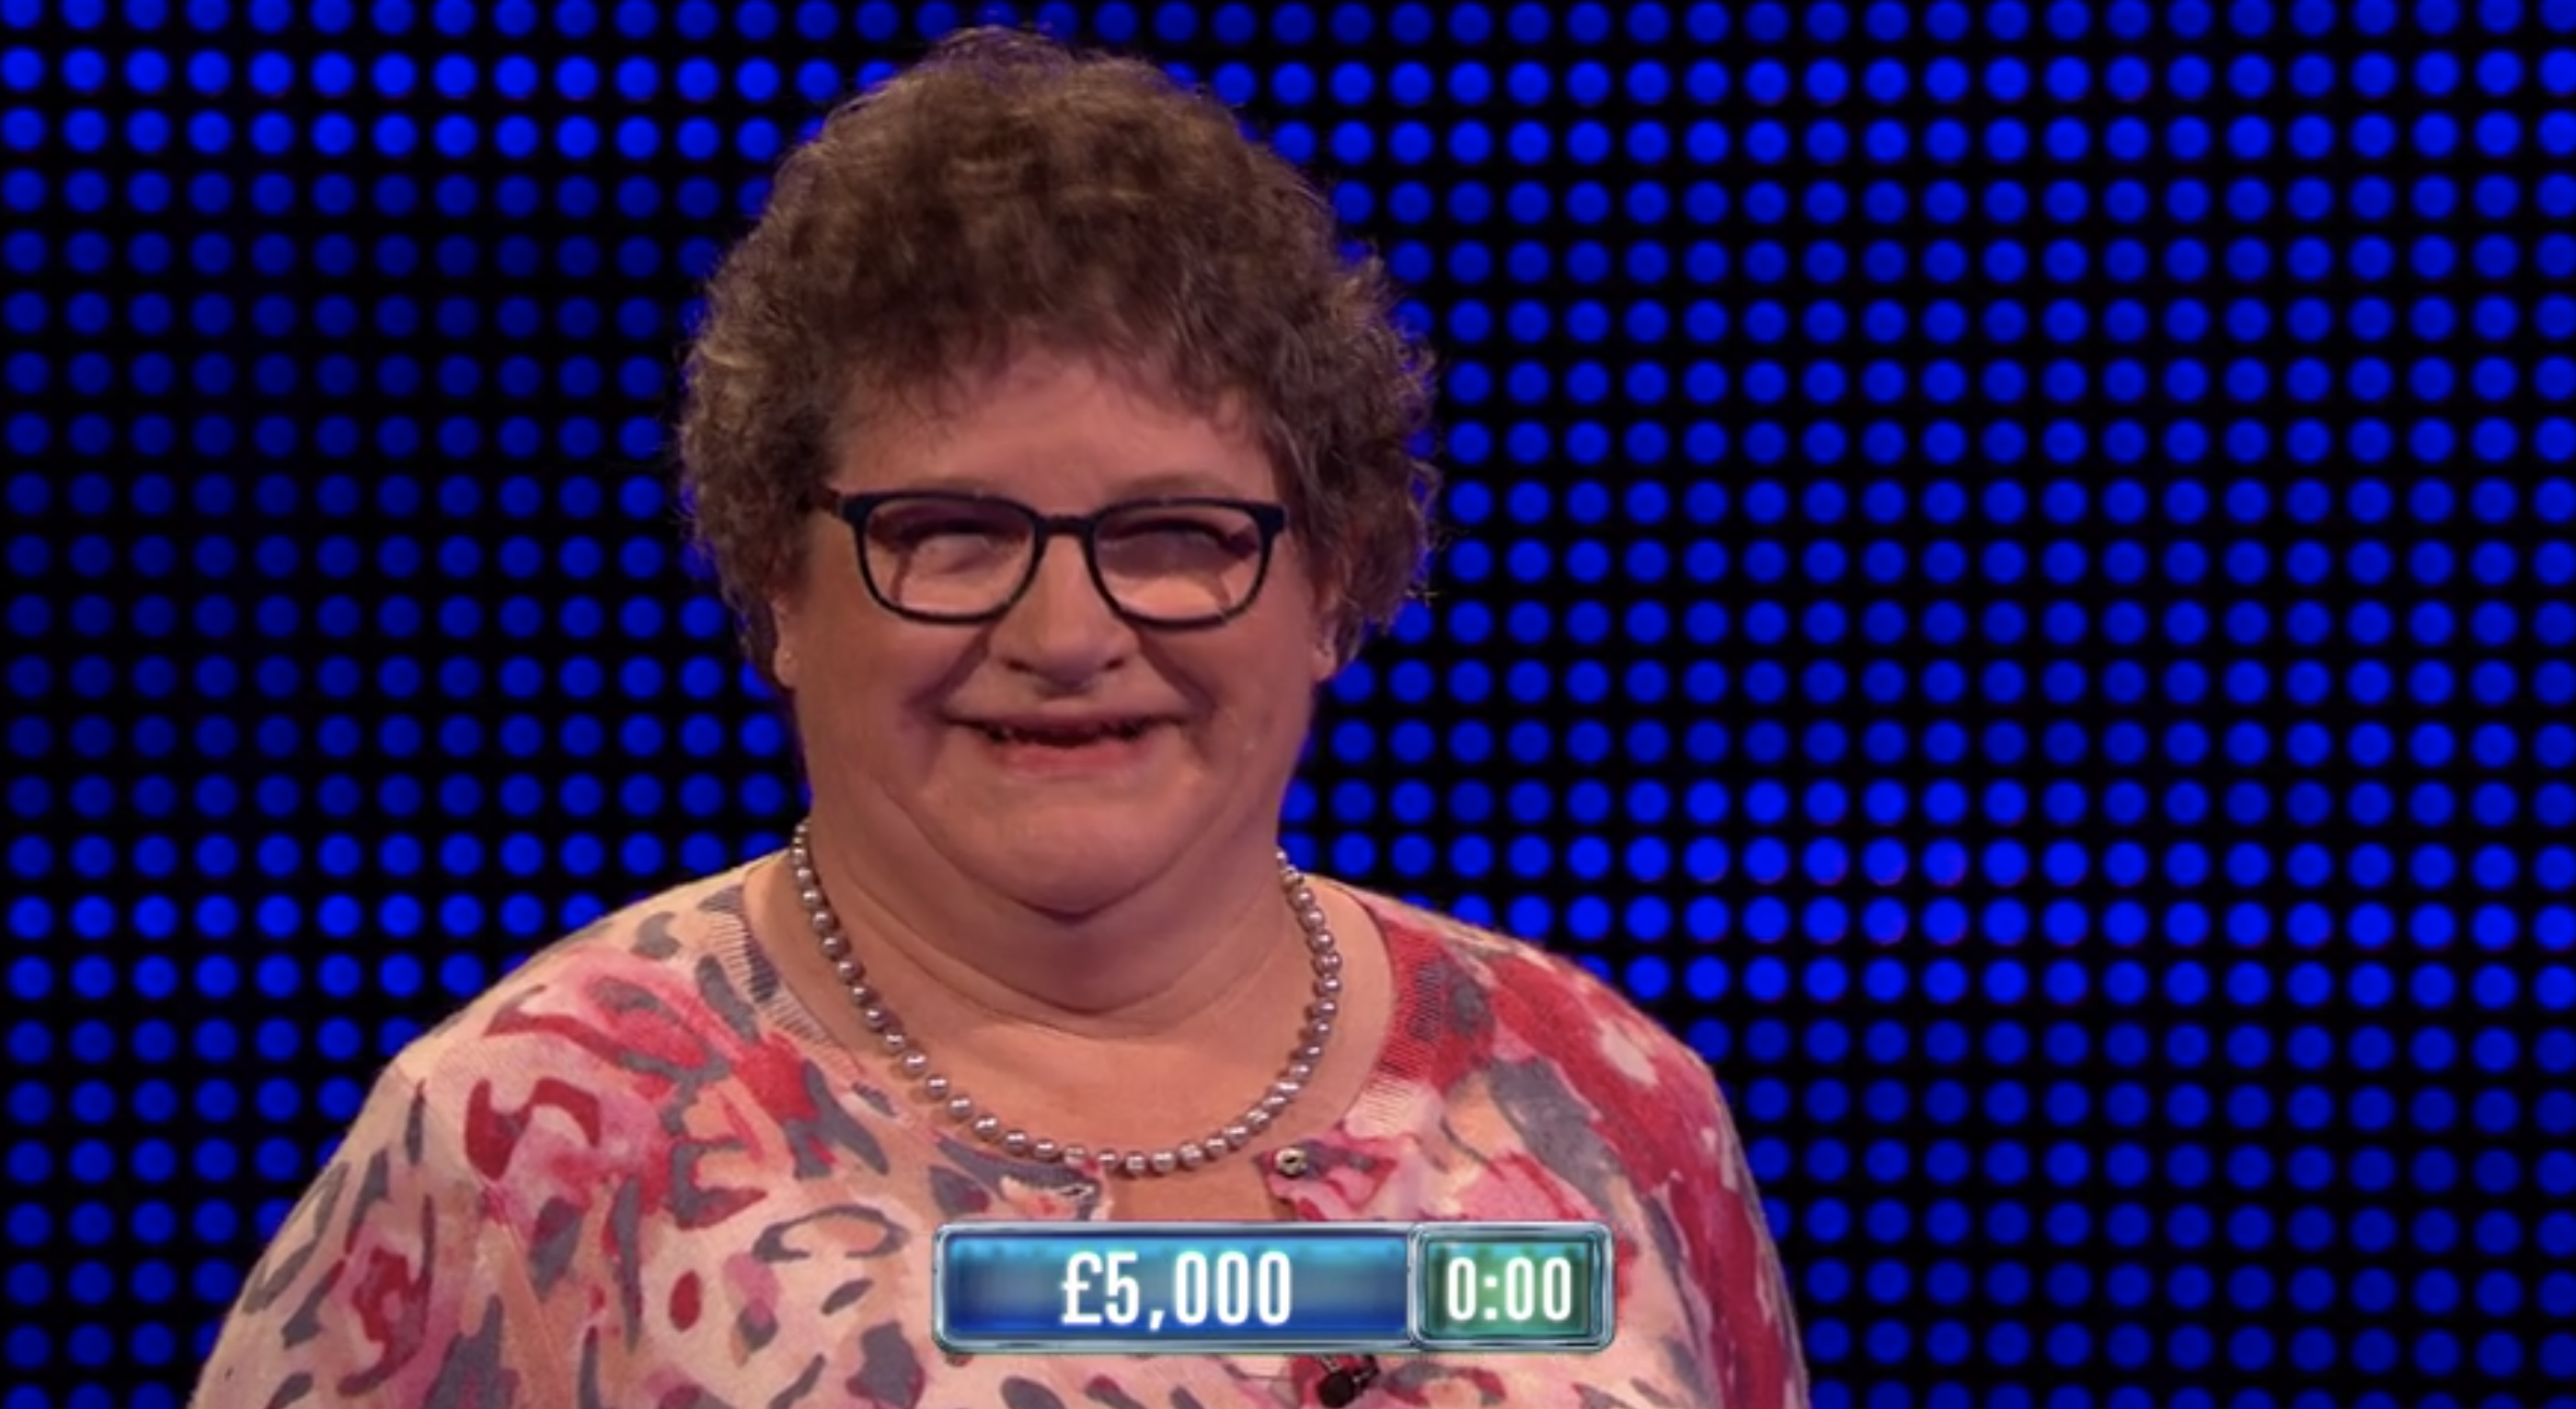 The Chase: Frances AKA "Su-Bo" didn't win but has the full support of Twitter!